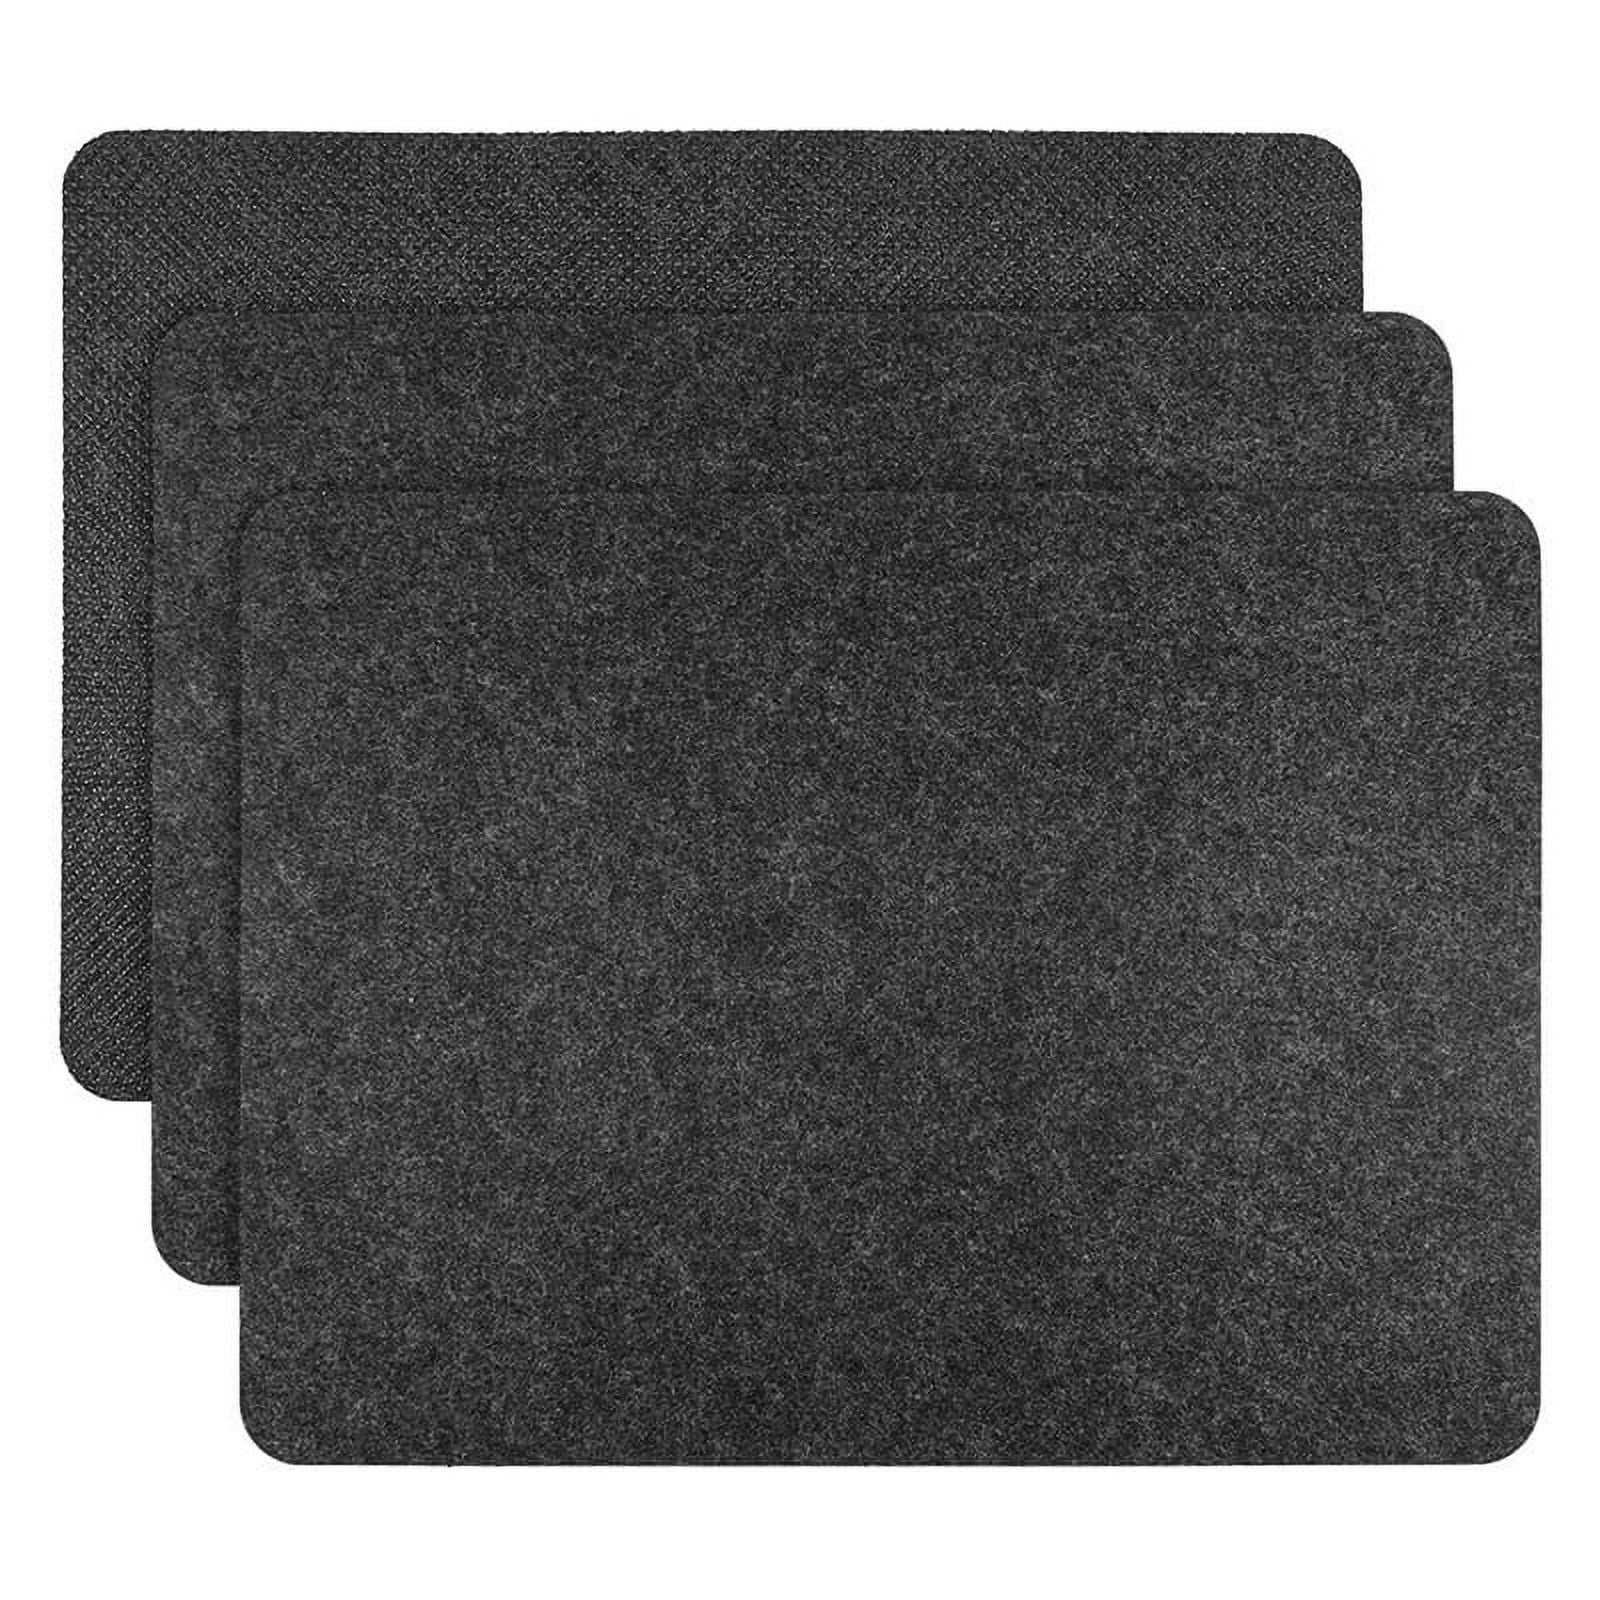 Range Kleen Silver Counter/Table Protector Mat - 14 x 17 Inches - 2 Pack